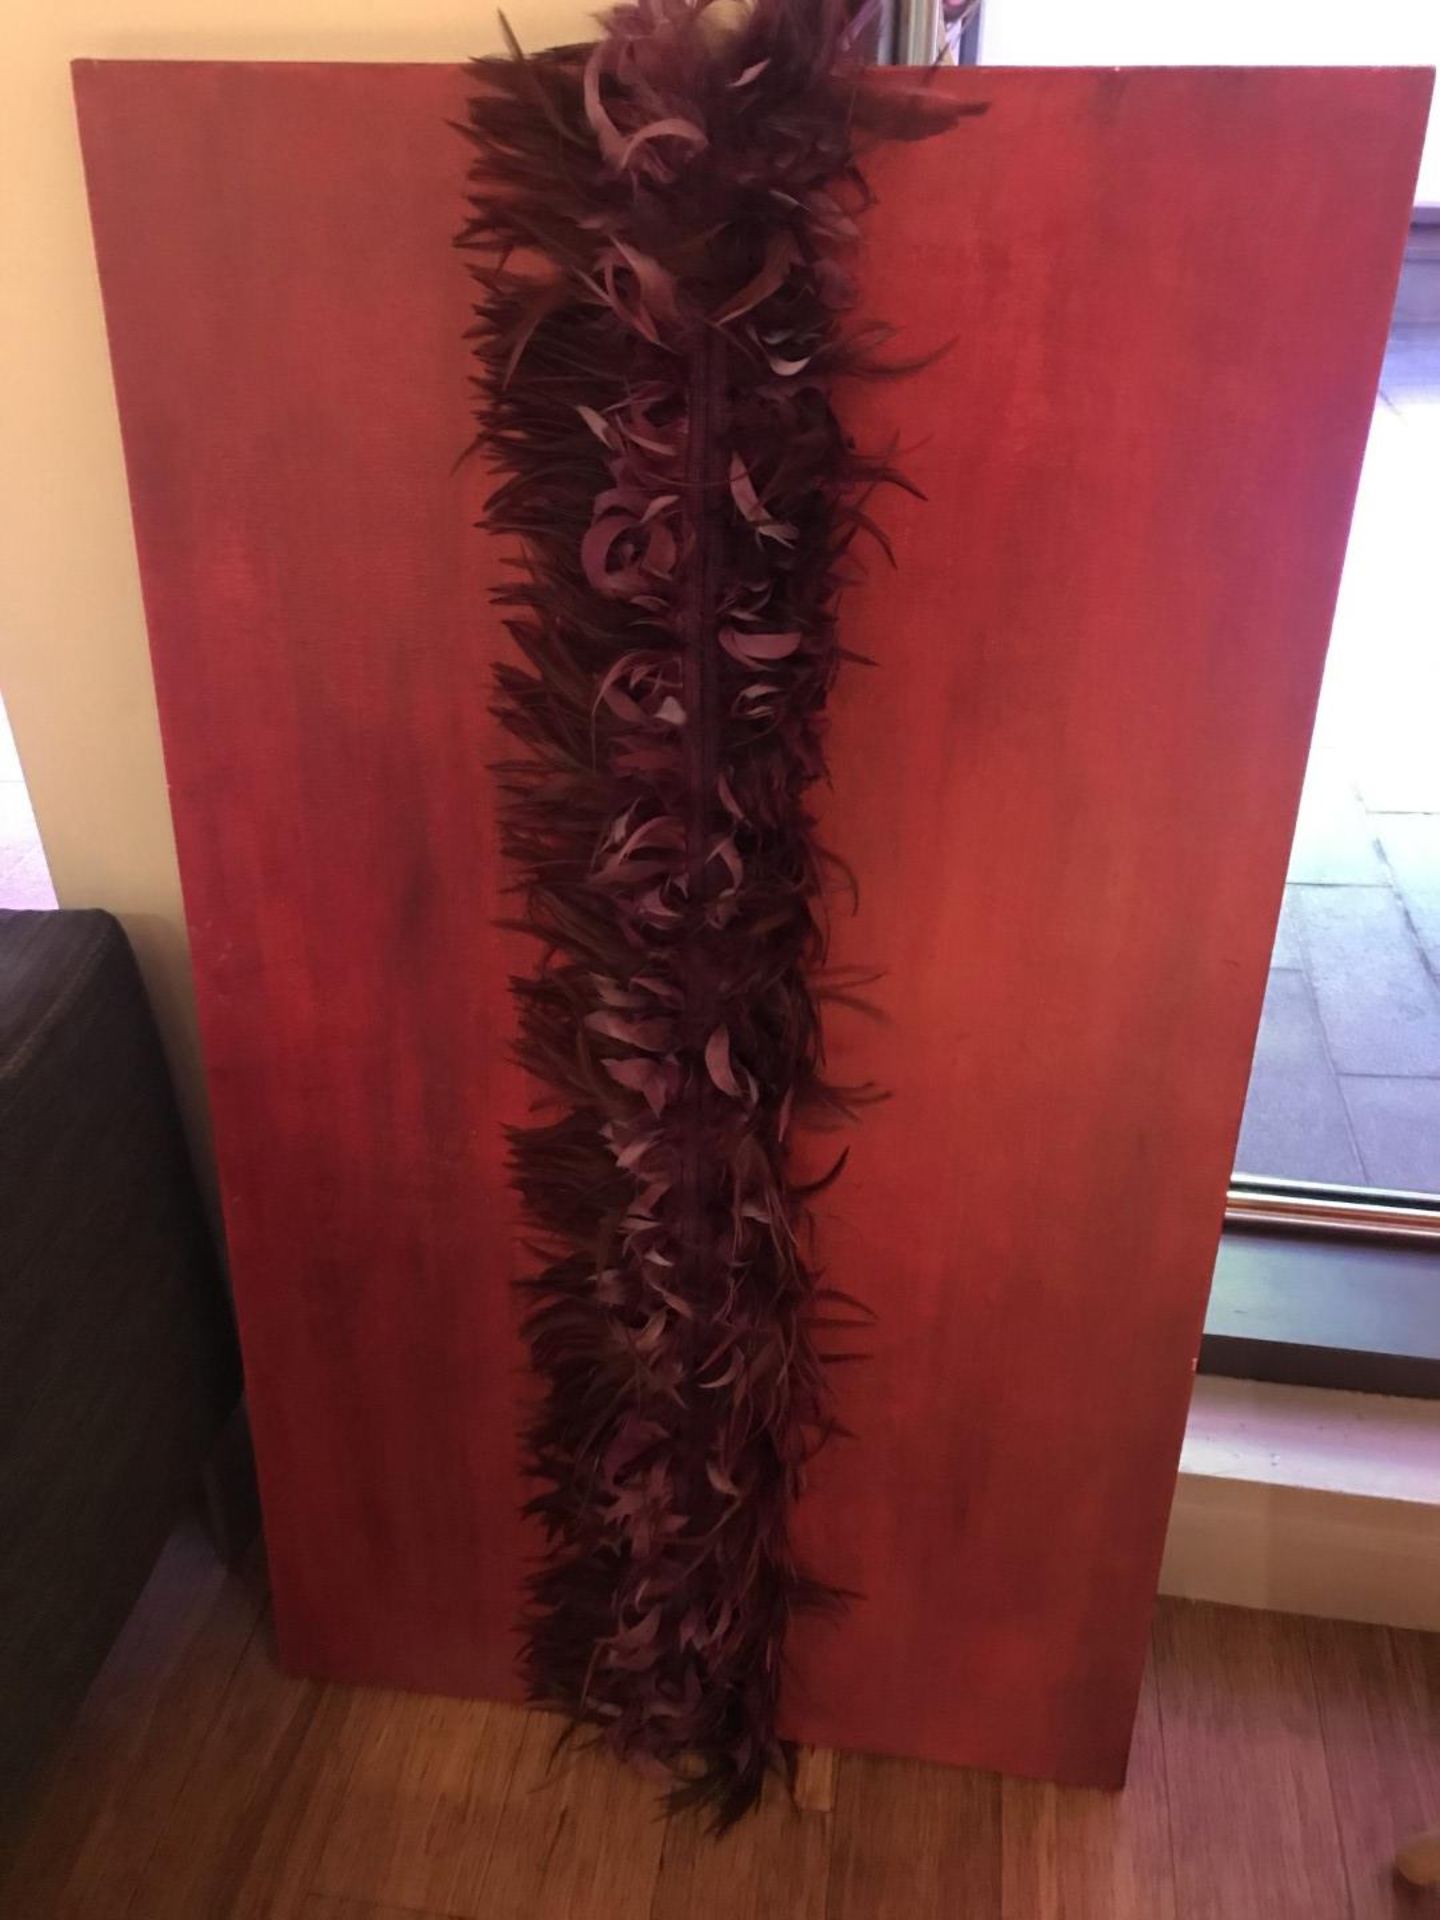 1 x Large Canvas Wall Art Picture With Faux Feather Central Boa - CL587 - Location: Altrincham WA14 - Image 3 of 3